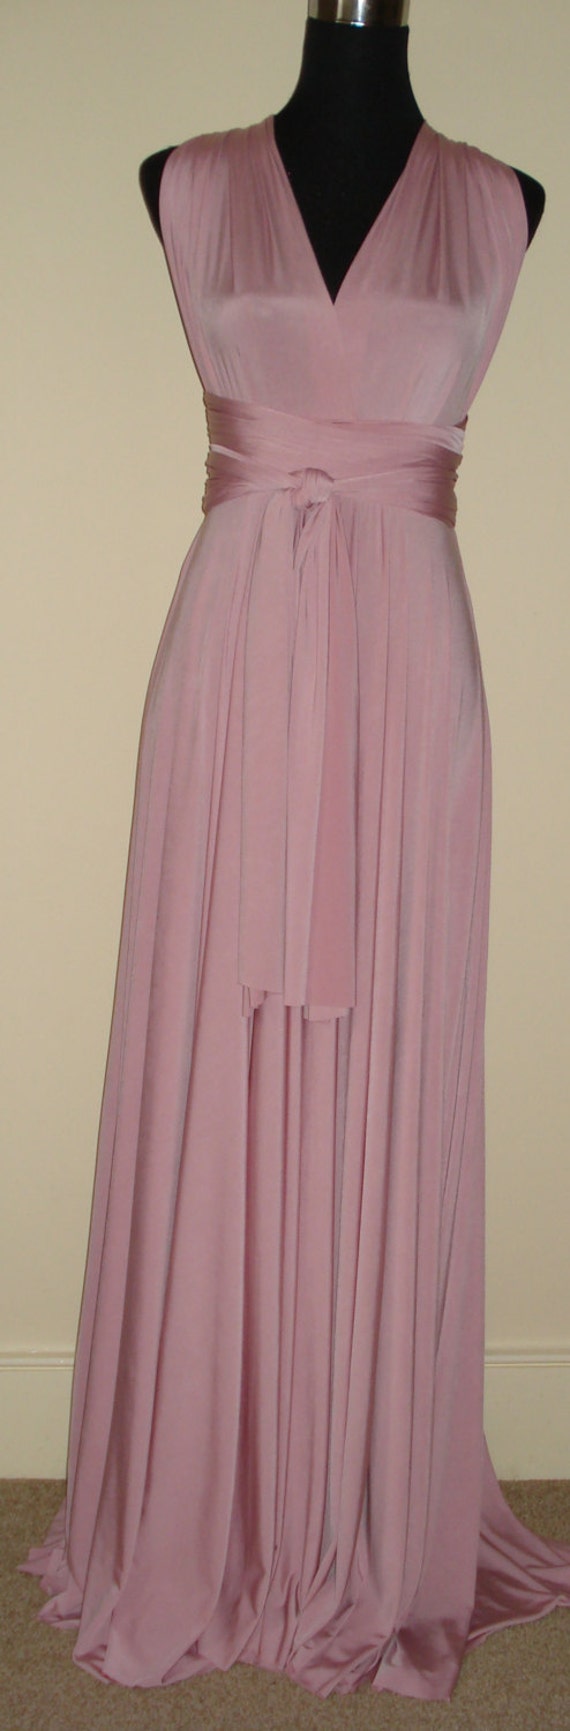 Multiway Bridesmaid Dress Infinity Dress Made To Order Floor